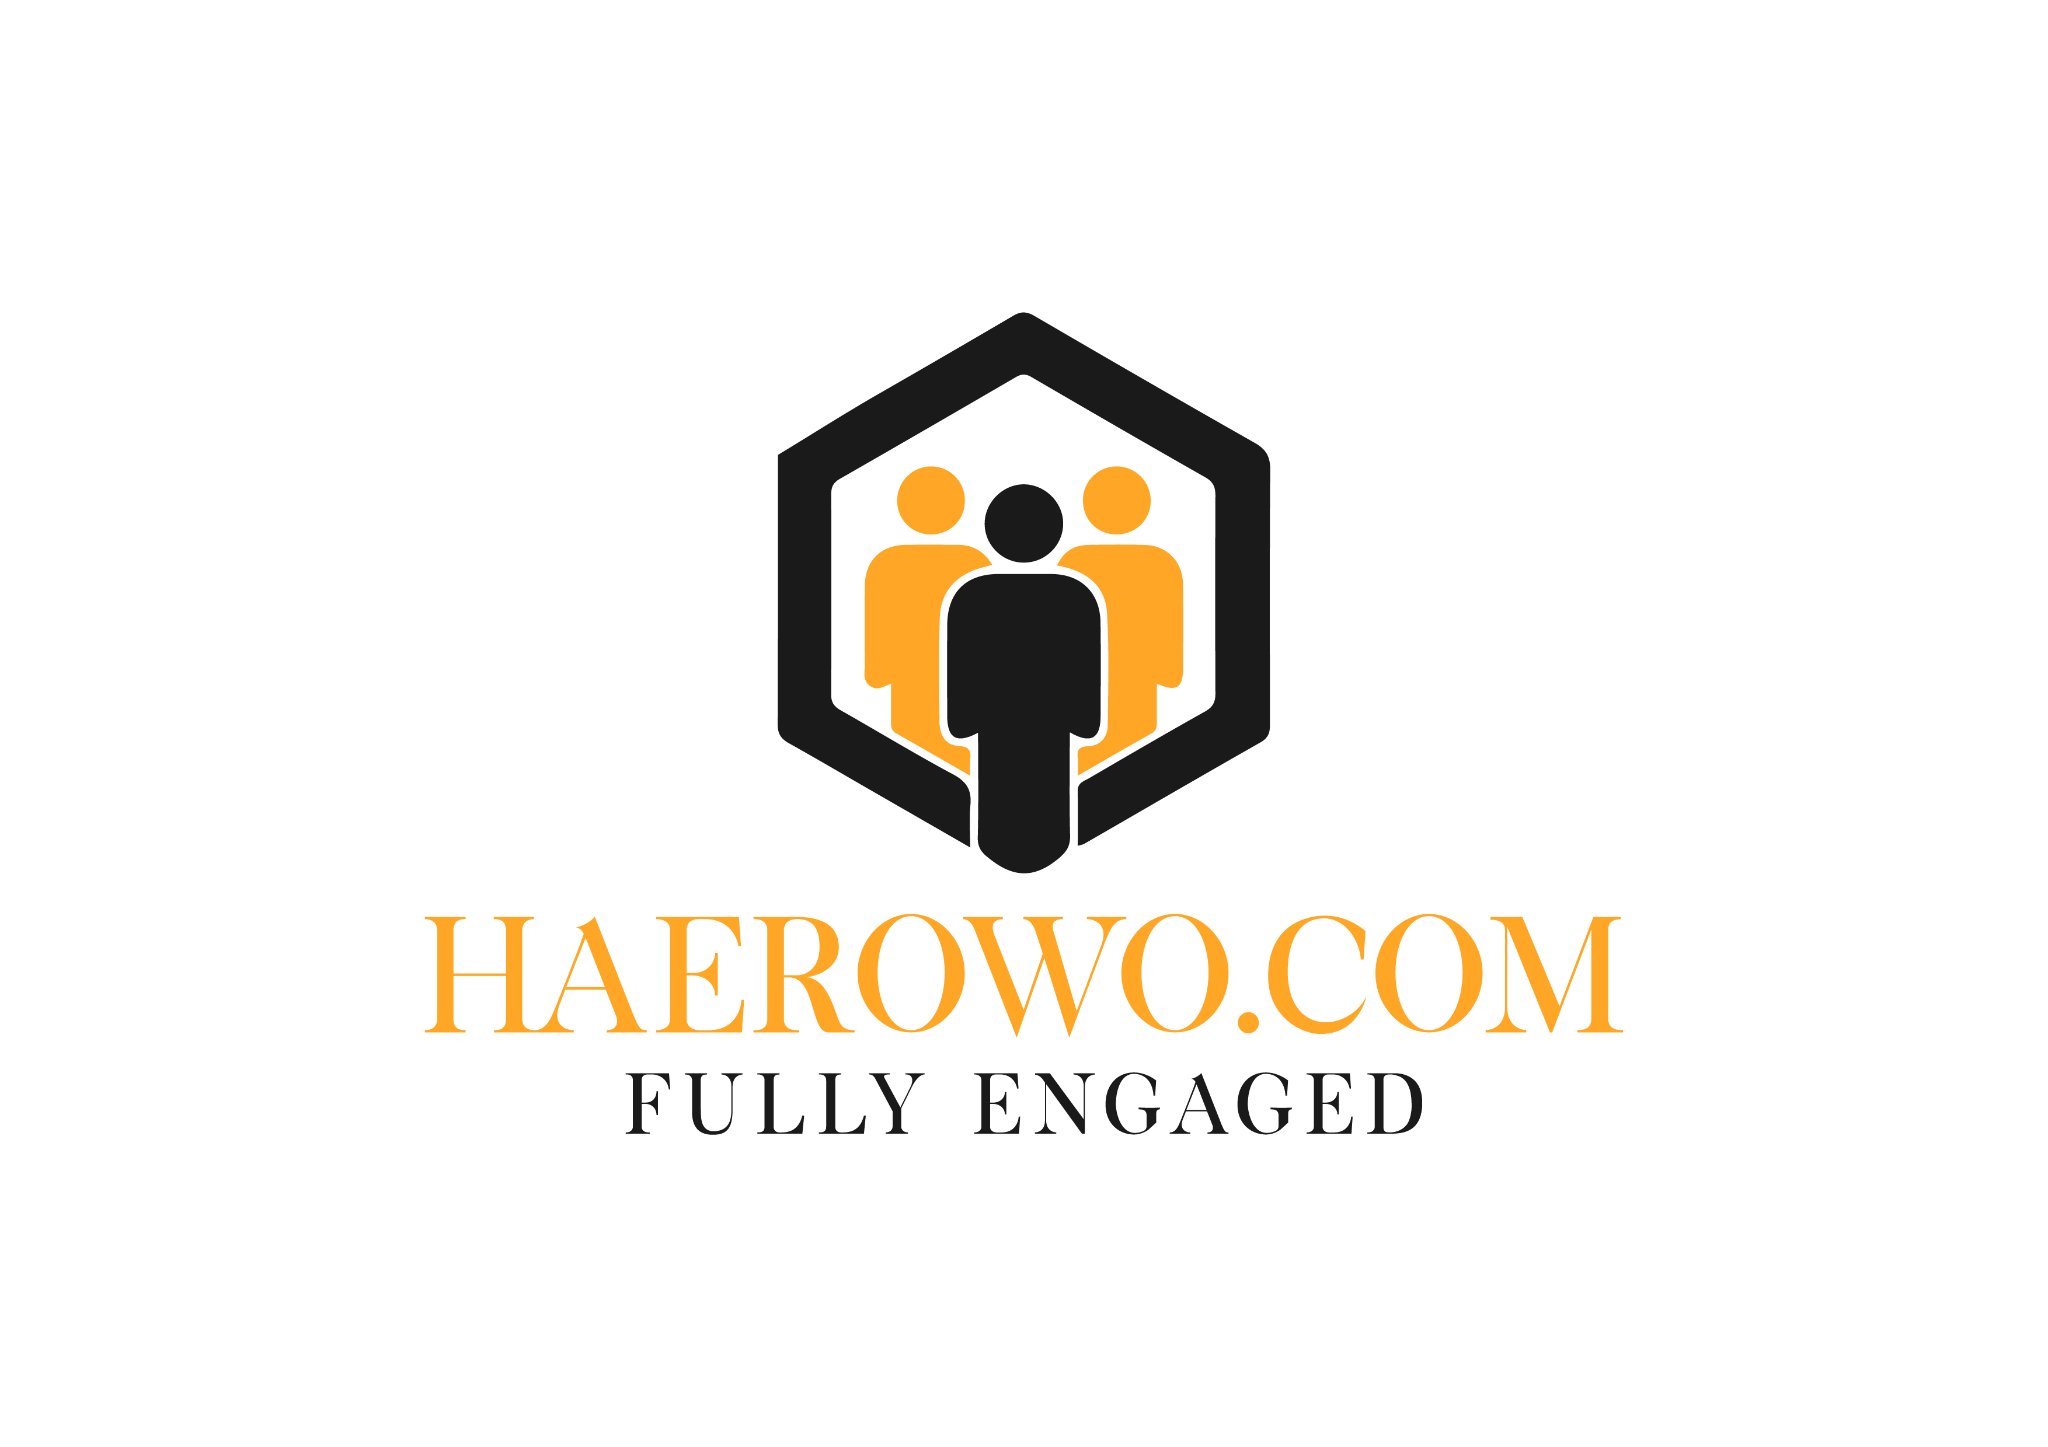 Professional recruitments all around Europe! Please contact us under: info@haerowo.com for further information!